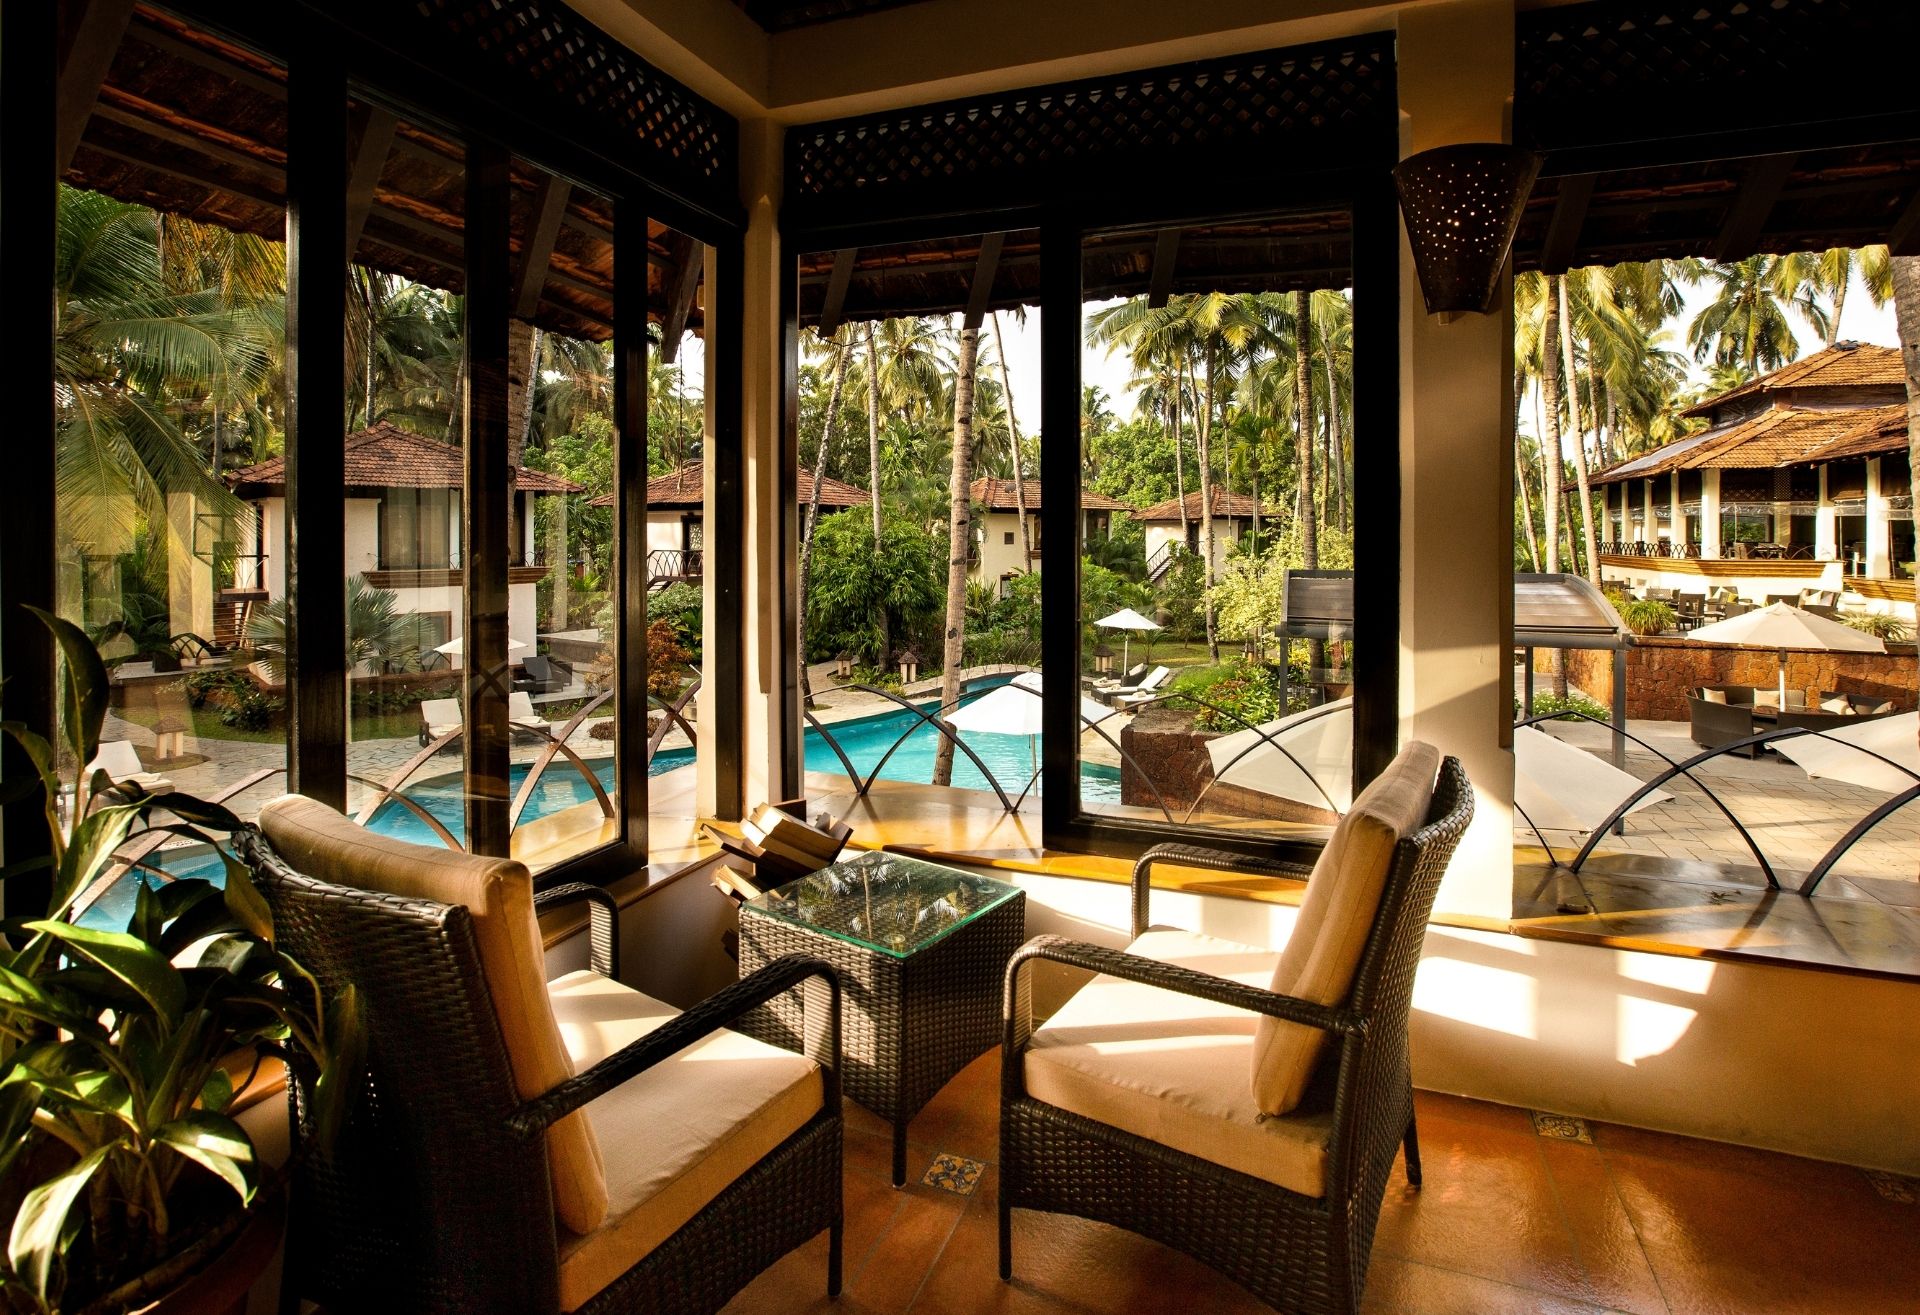 Why book your resort in goa directly?